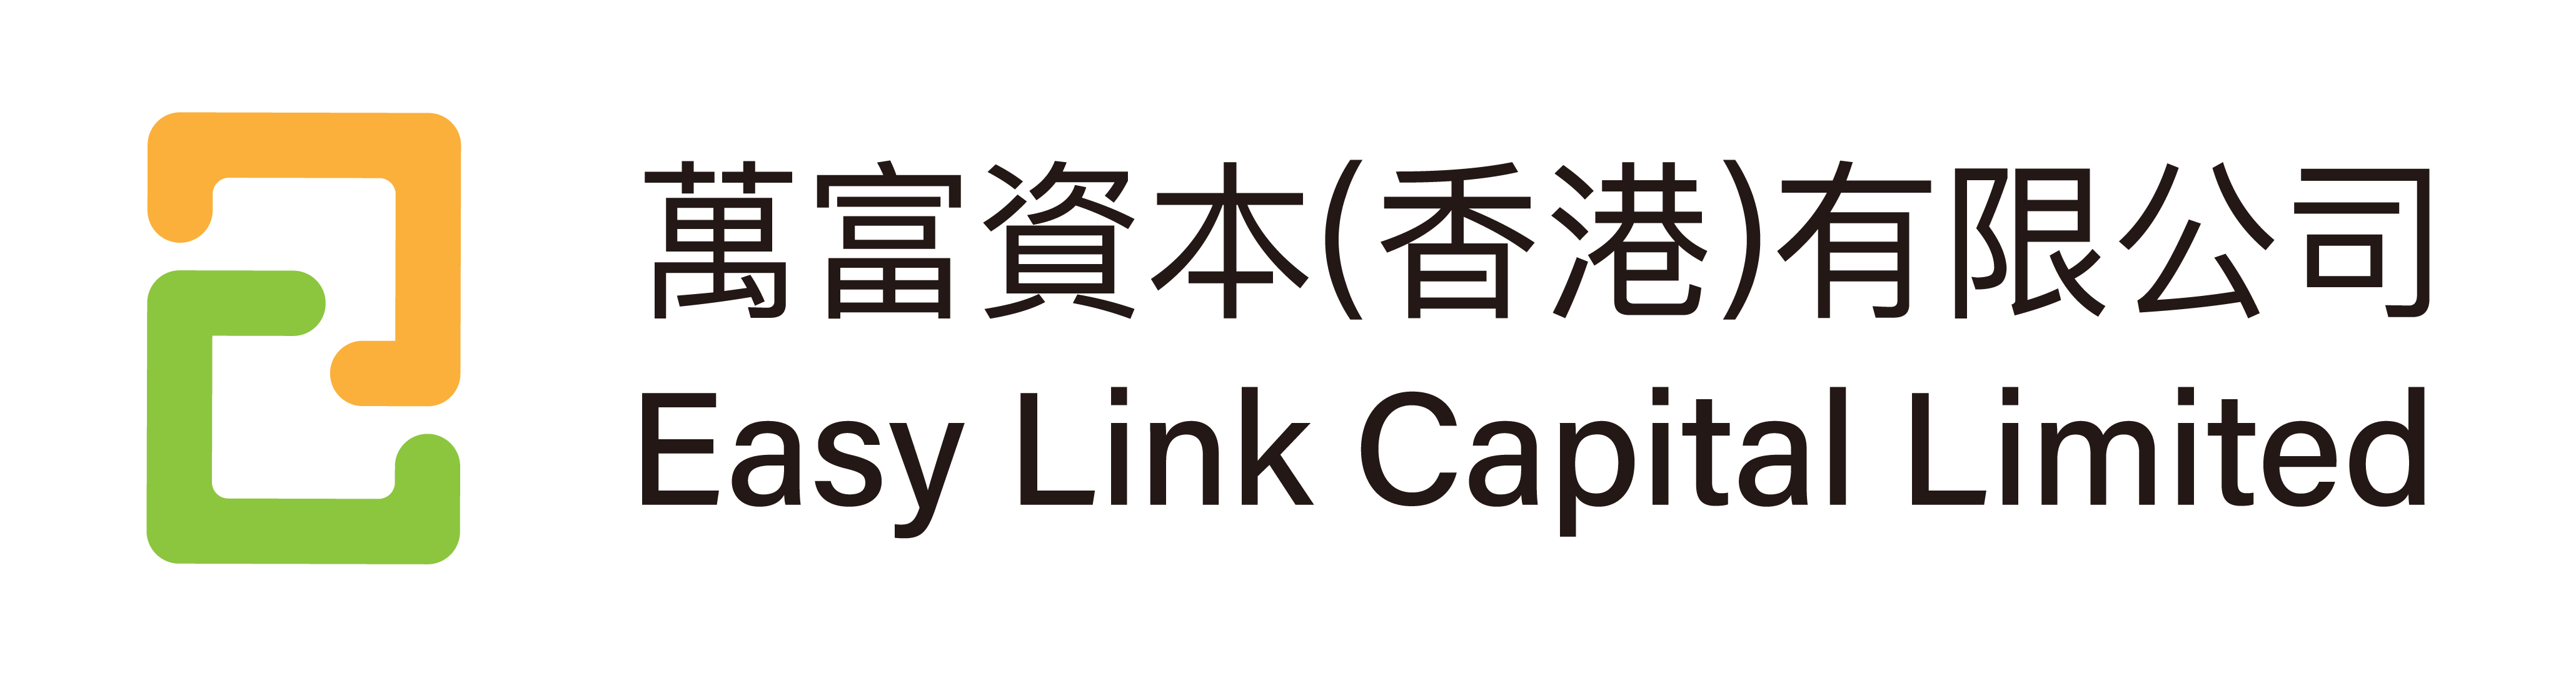 Easy Link Capital Limited Logo